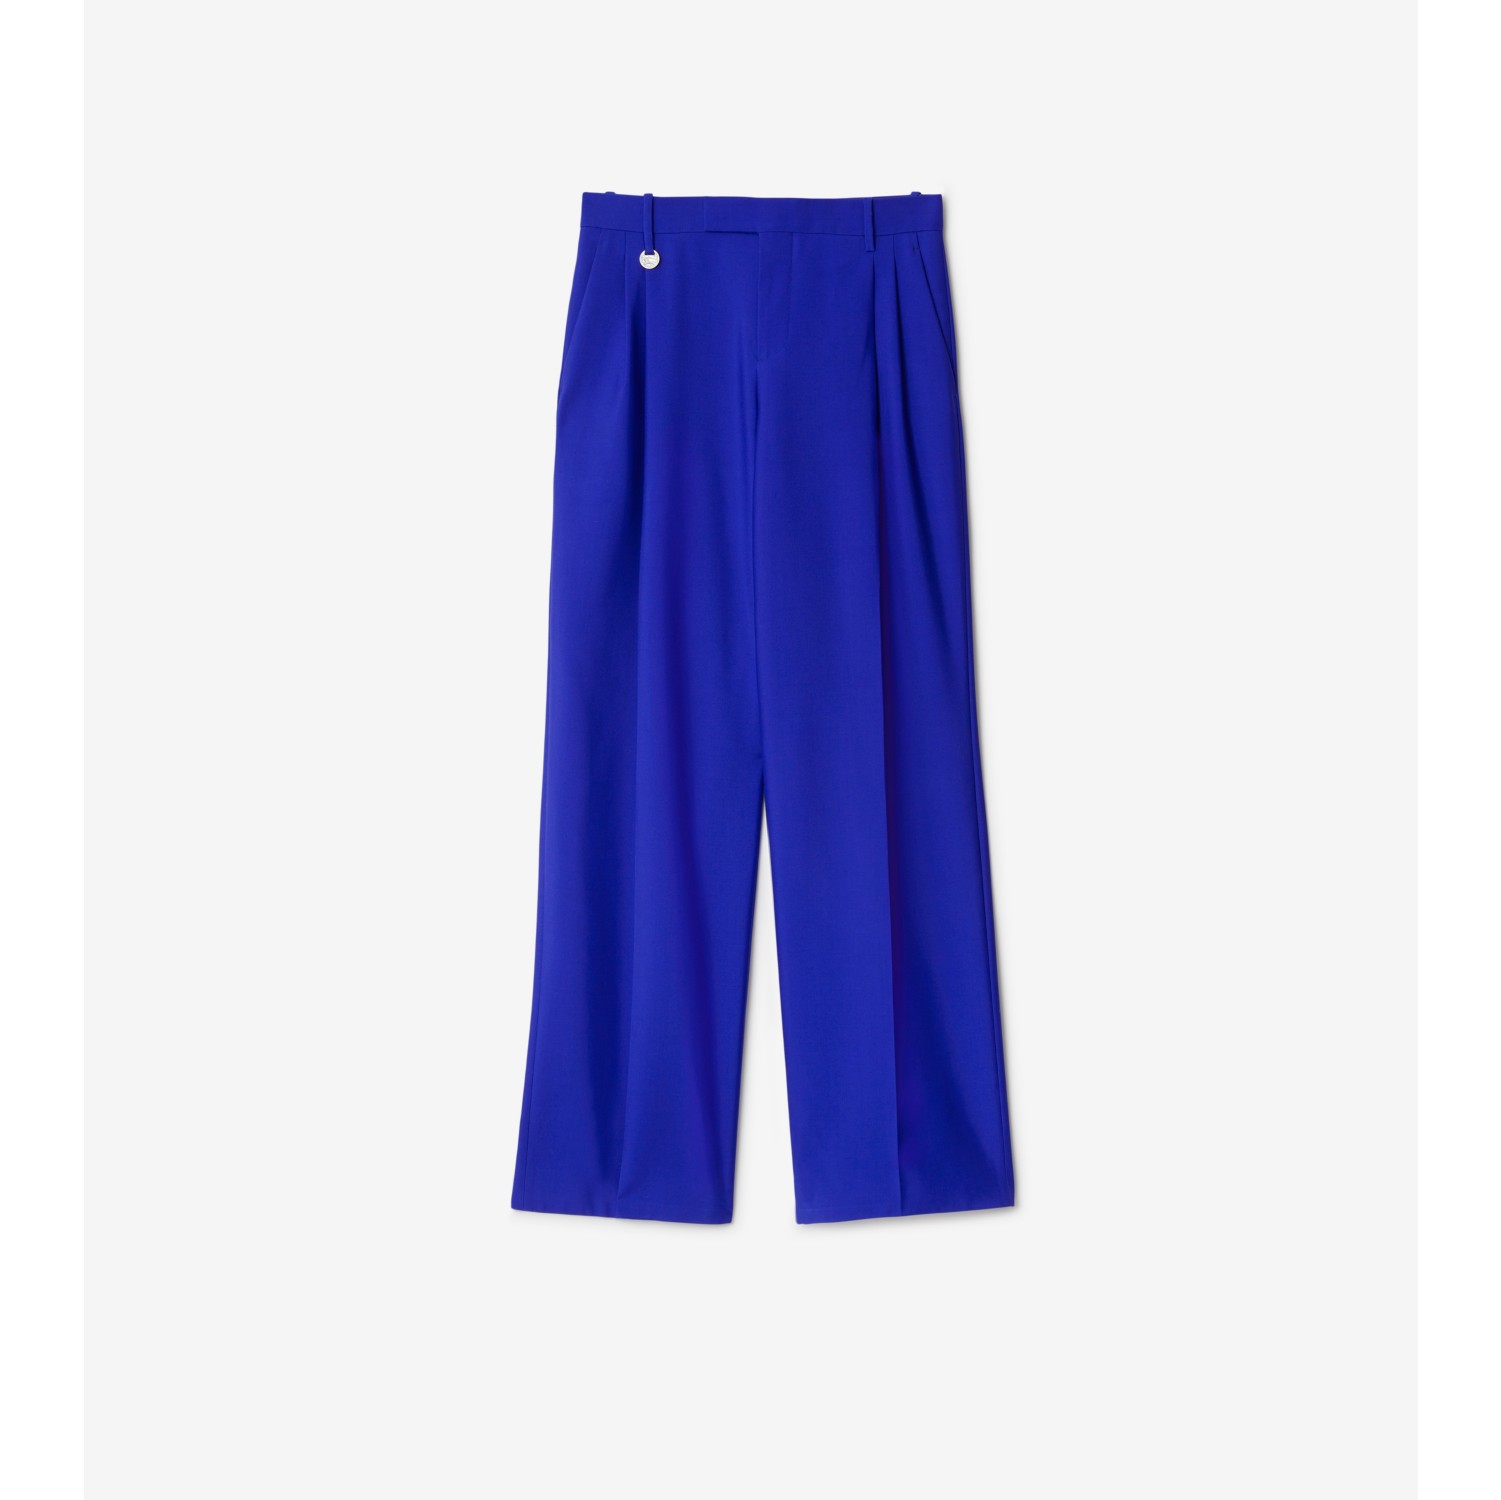 Wool Tailored Trousers in Knight